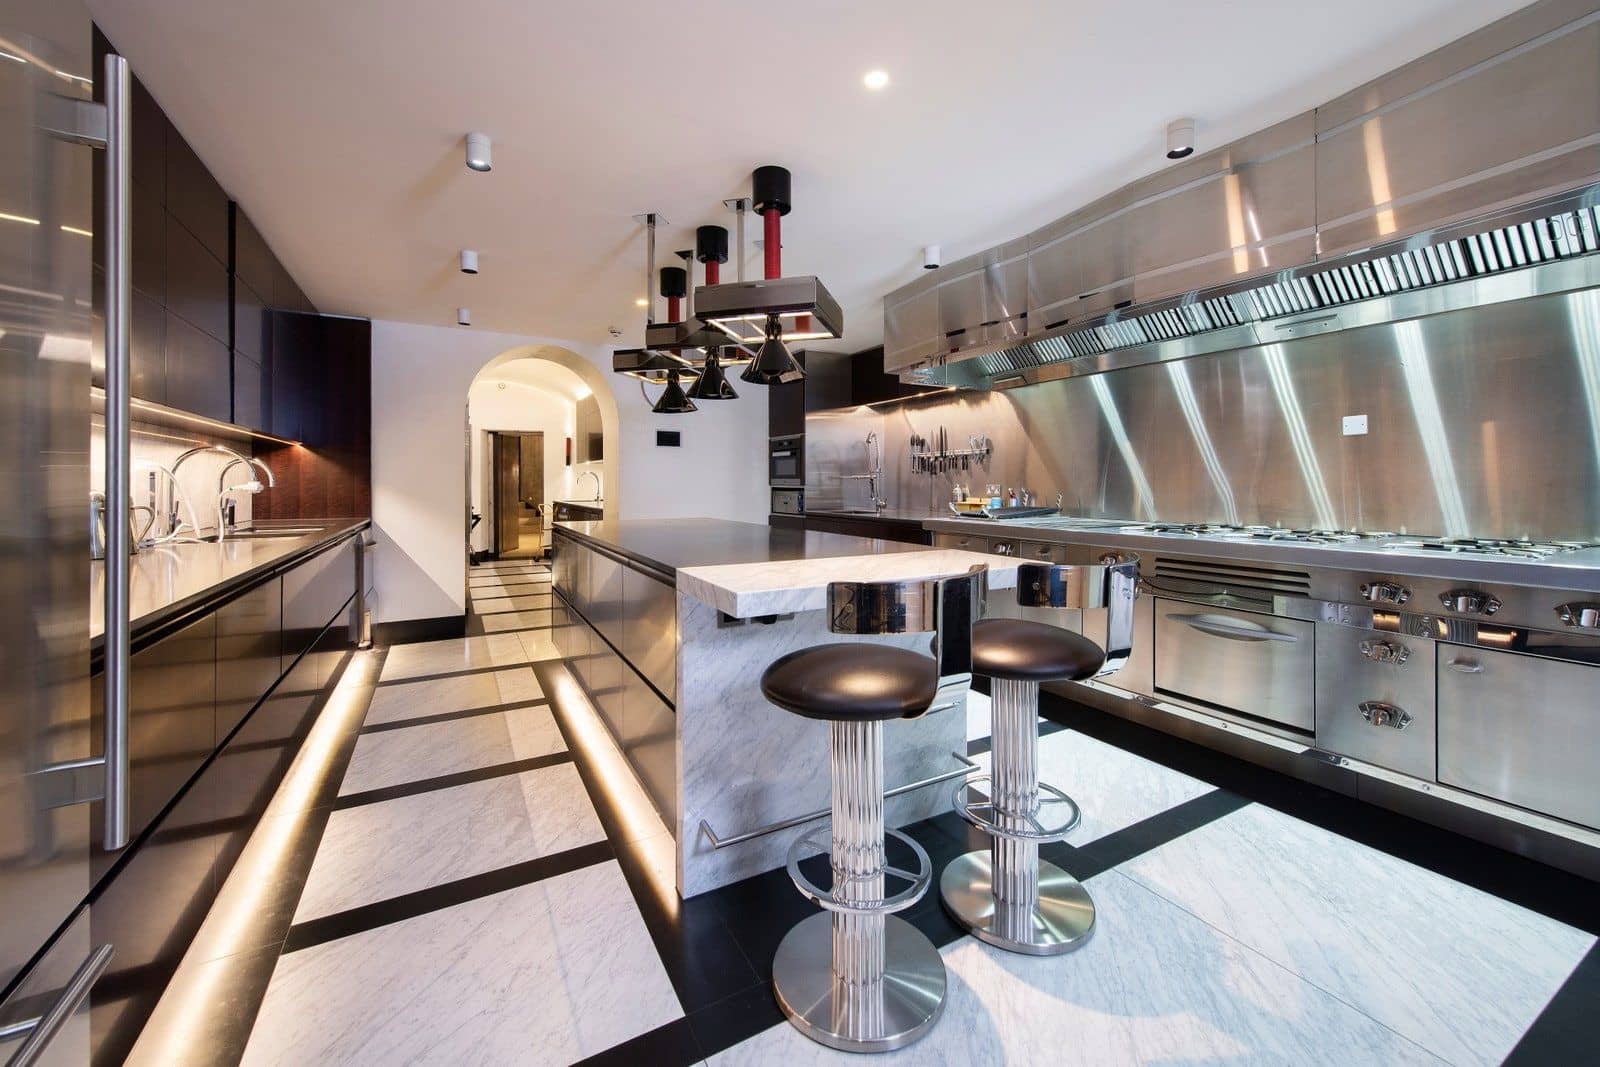 Fully stocked modern kitchen space inside the former Gucci Grafton Street headquarters.